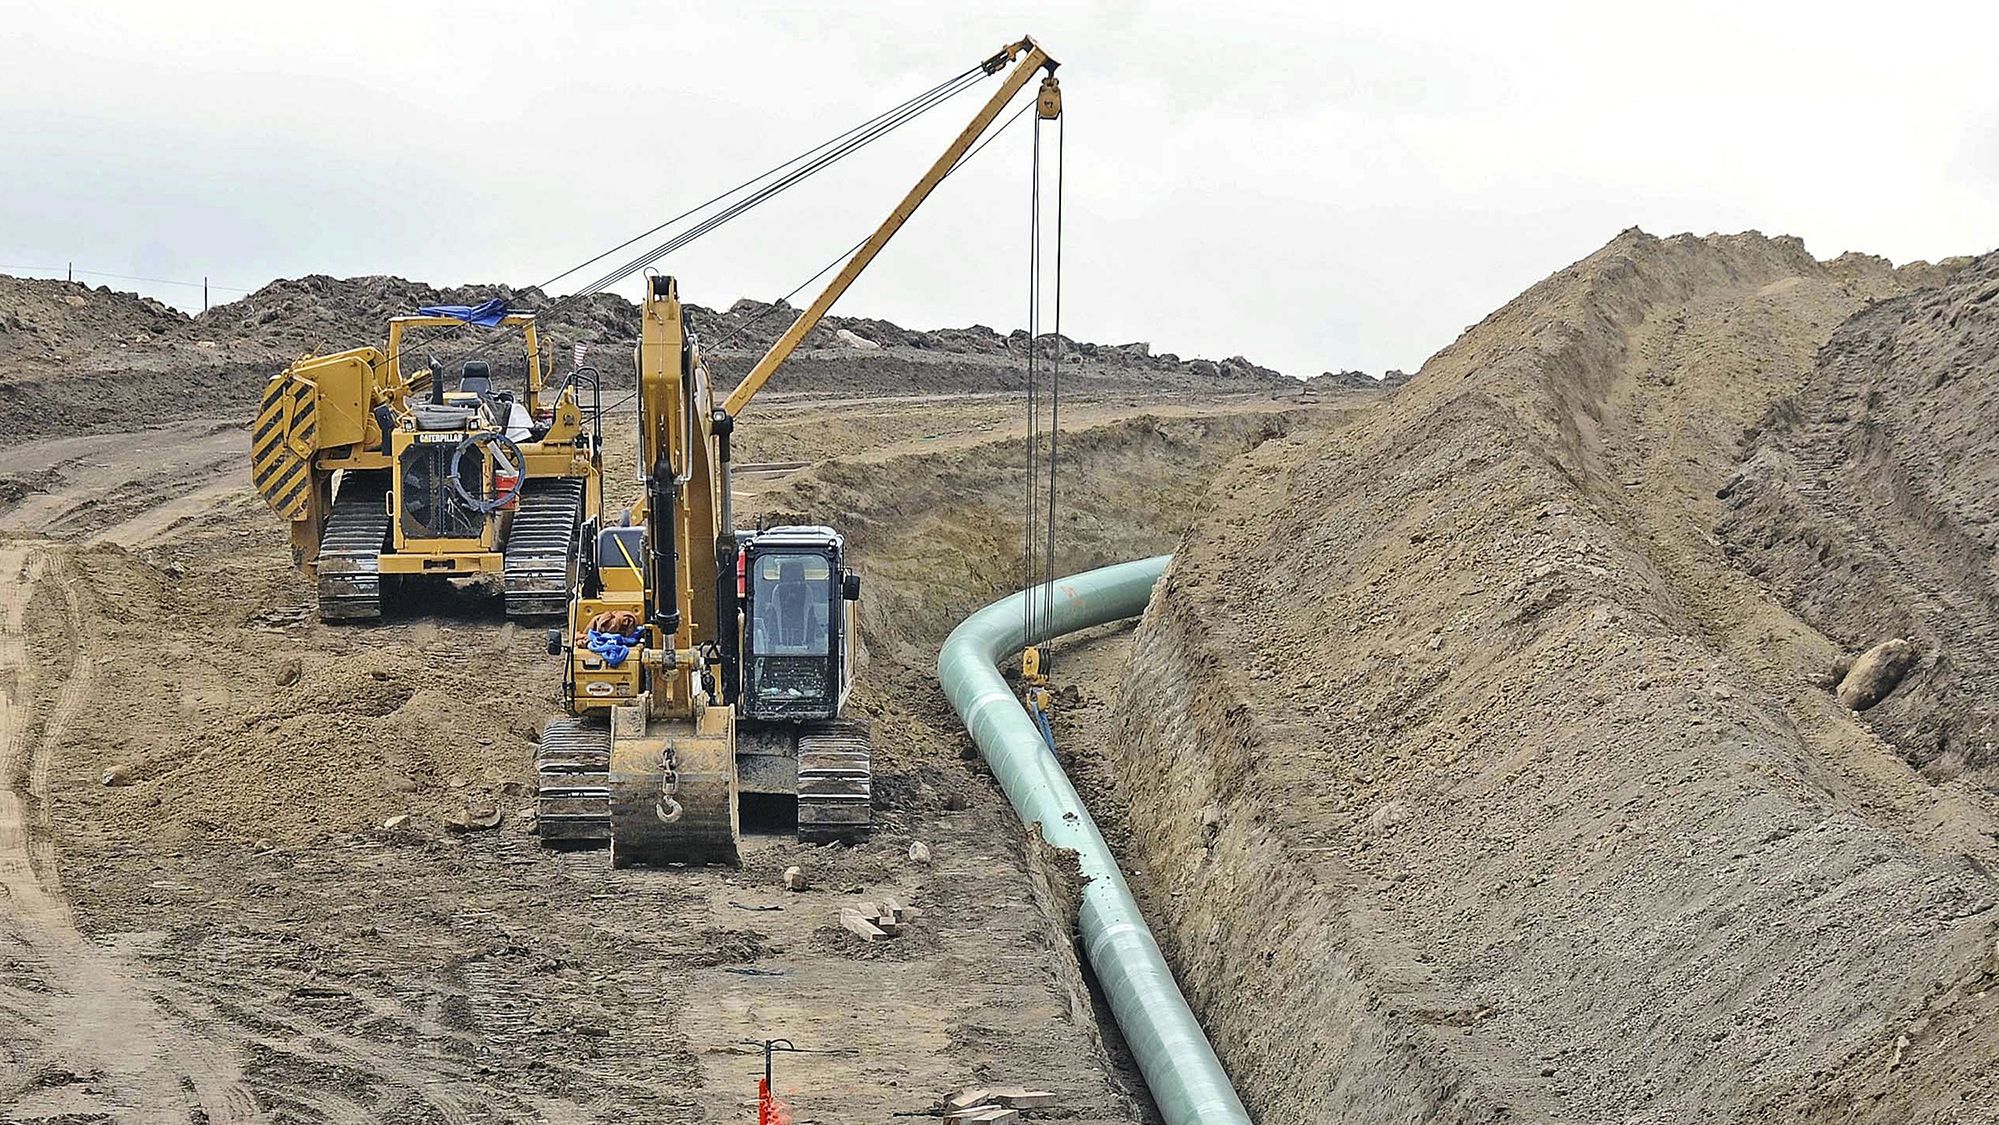 FILE - In this Oct. 5, 2016, file photo, heavy equipment is seen at a site where sections of the Dakota Access pipeline were being buried near the town of St. Anthony in Morton County, N.D. Native American tribes opposed to the Dakota Access Pipeline once again have asked a federal judge to stop the flow of oil while the legal battle over the line's future plays out. (Tom Stromme/The Bismarck Tribune via AP, File)